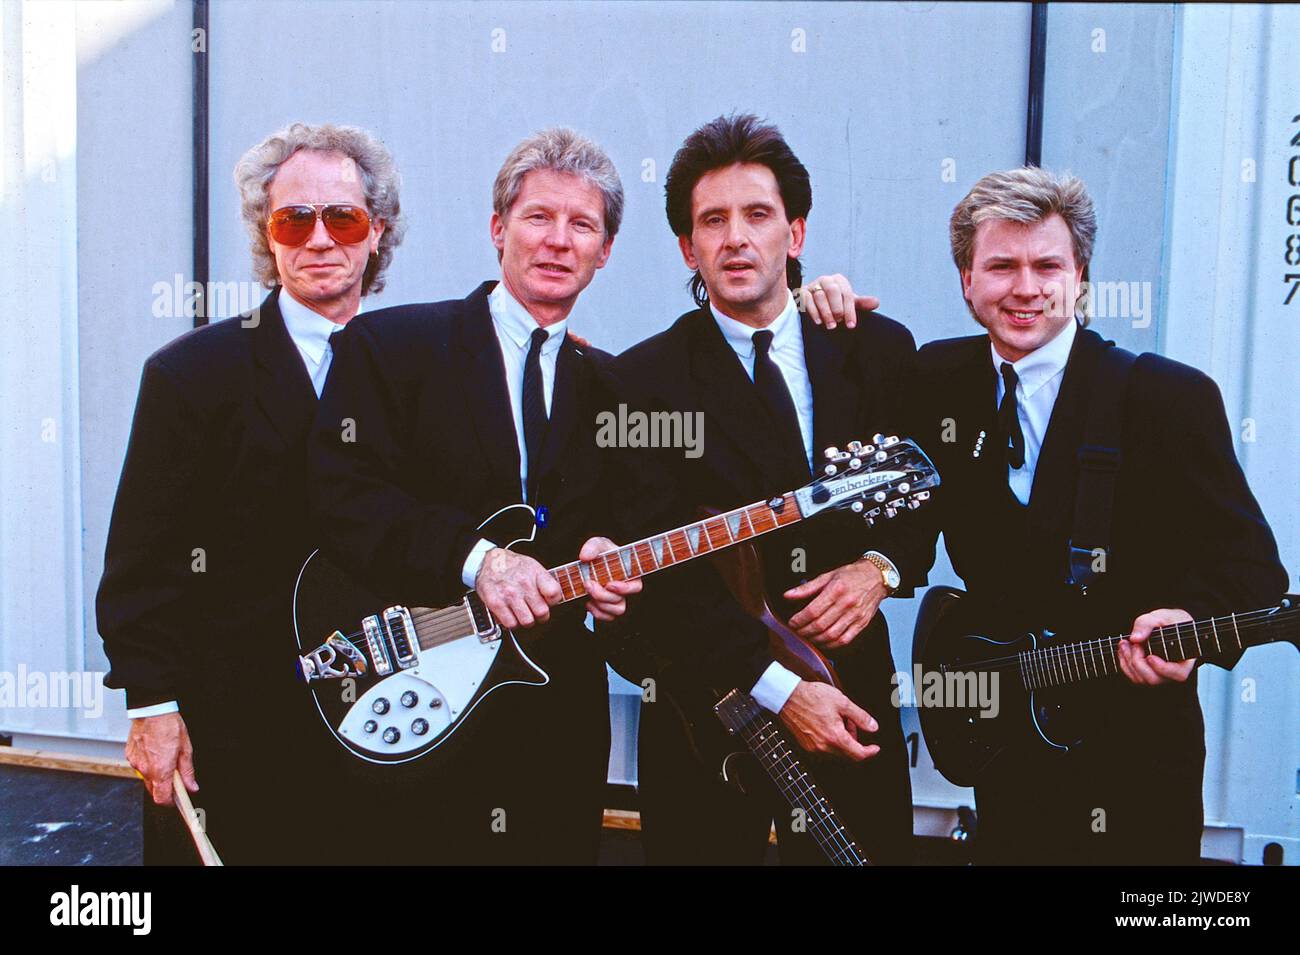 The Tremeloes, britische Pop Band, Aufnahme in Deutschland, 1991. The Tremeloes, British Pop Band, photo shoot, Germany, 1991. Stock Photo